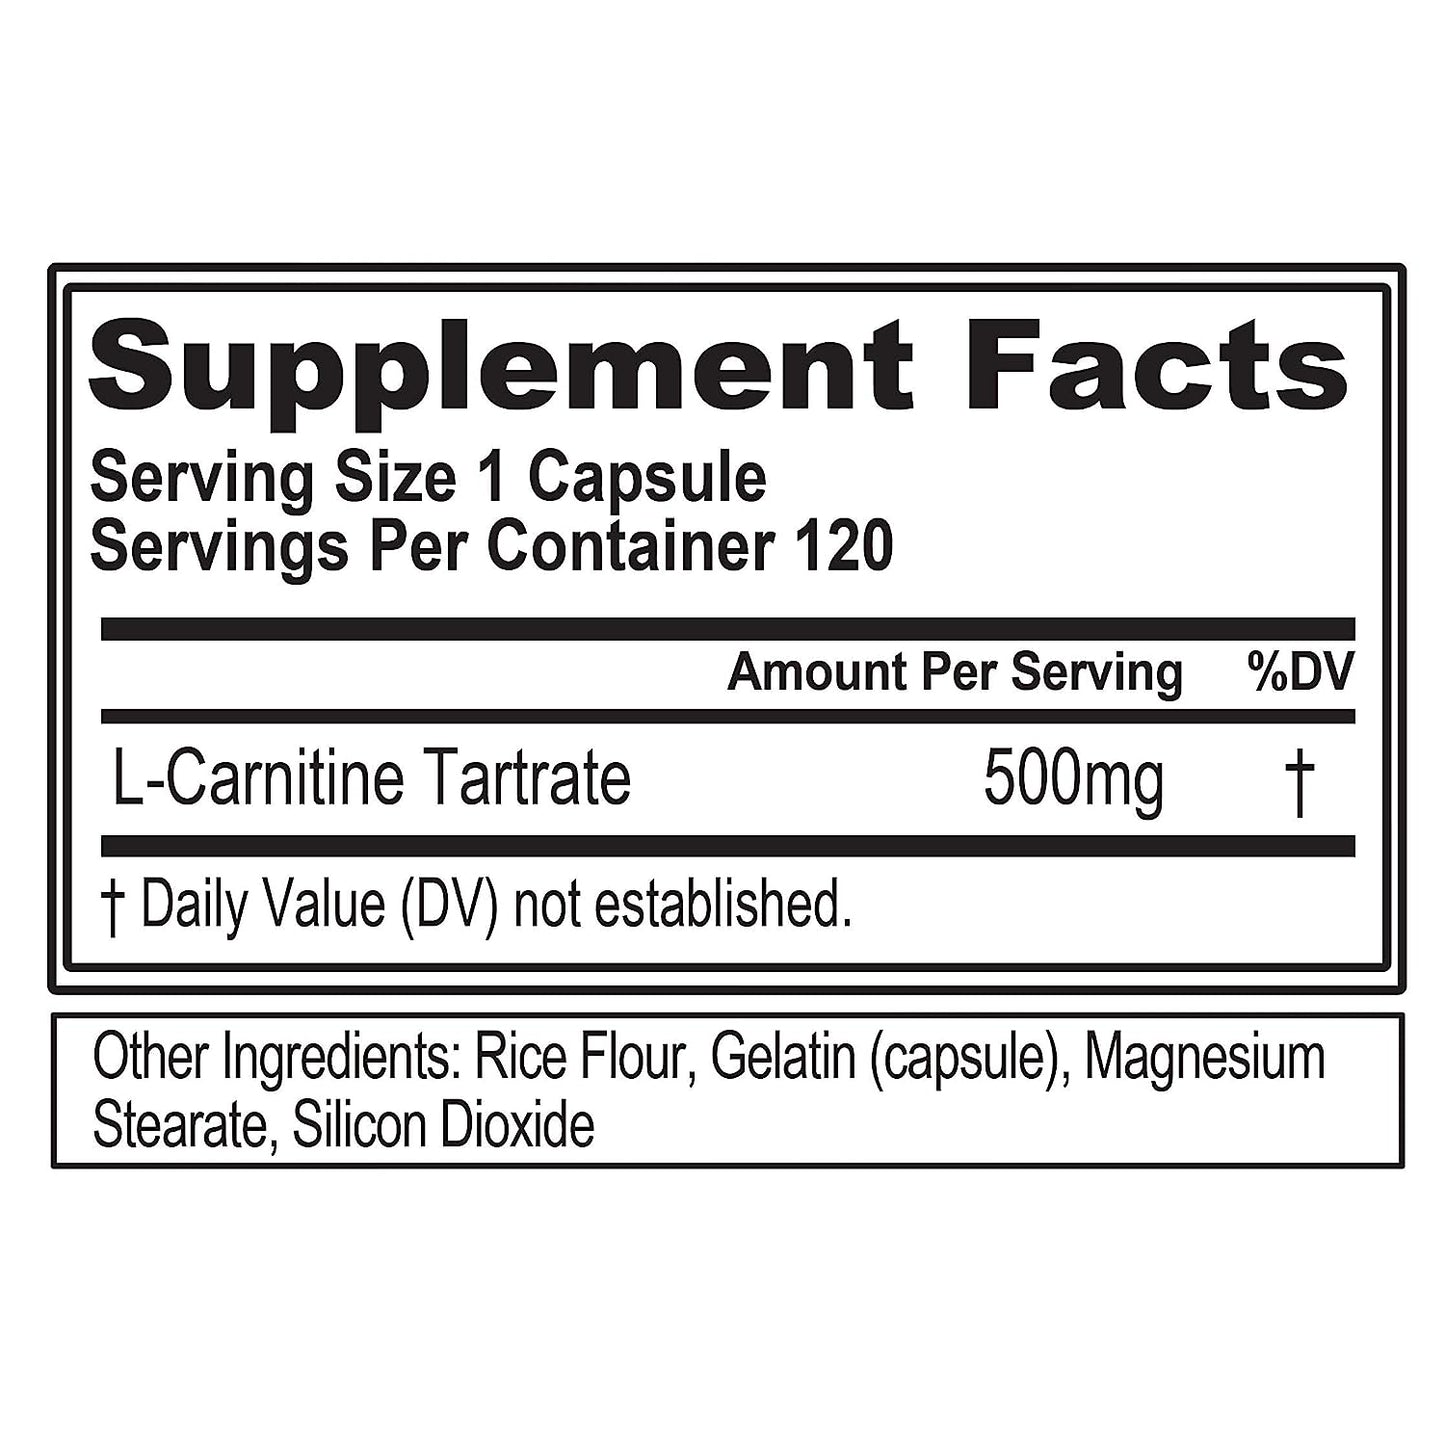 Evlution Nutrition (EVL) Carnitine, 500 mg of Pure L-Carnitine in Each Serving, 120 Capsules